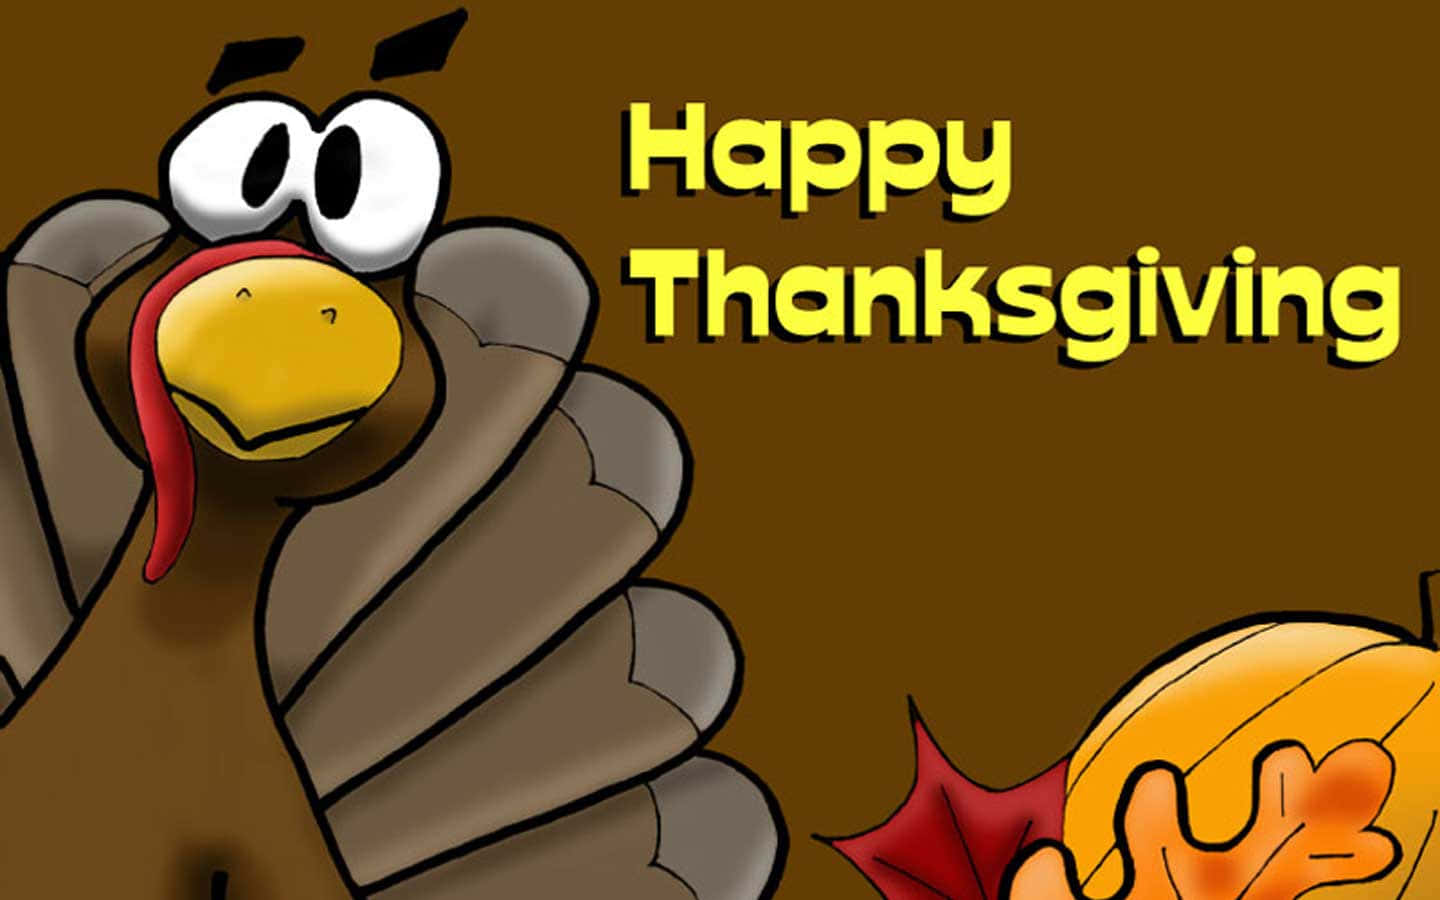 "Wishing everyone a very Happy Thanksgiving!" Wallpaper